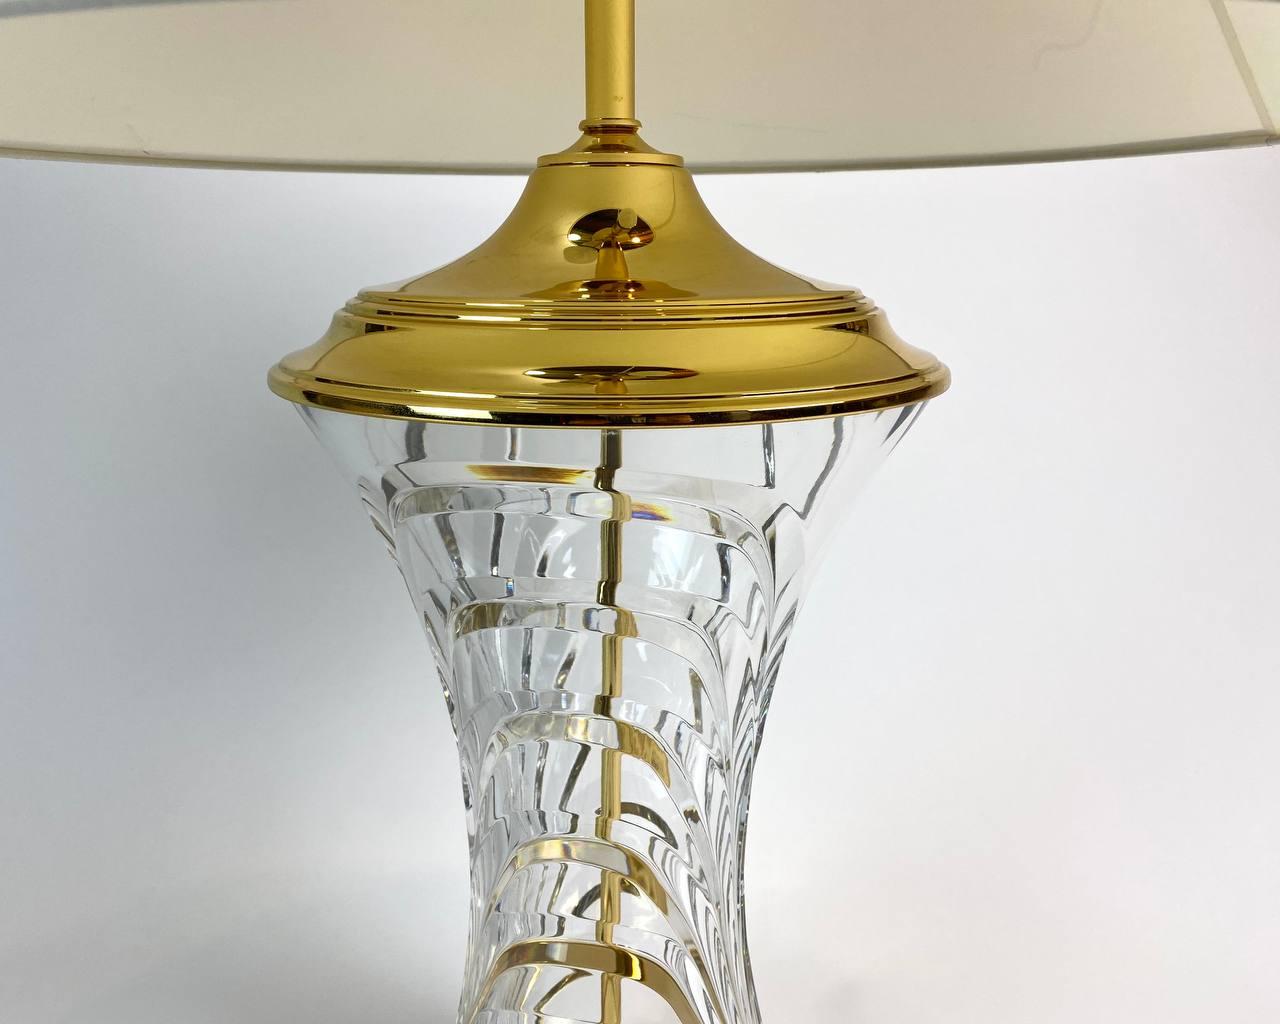 - Table lamp from Nachtmann Leuchten, Germany
- Made of crystal and brass
- Circa 1970s

Dimensions:

Height: 85 cm (33.5 in) 
Diameter: 60 cm (23.6 in).